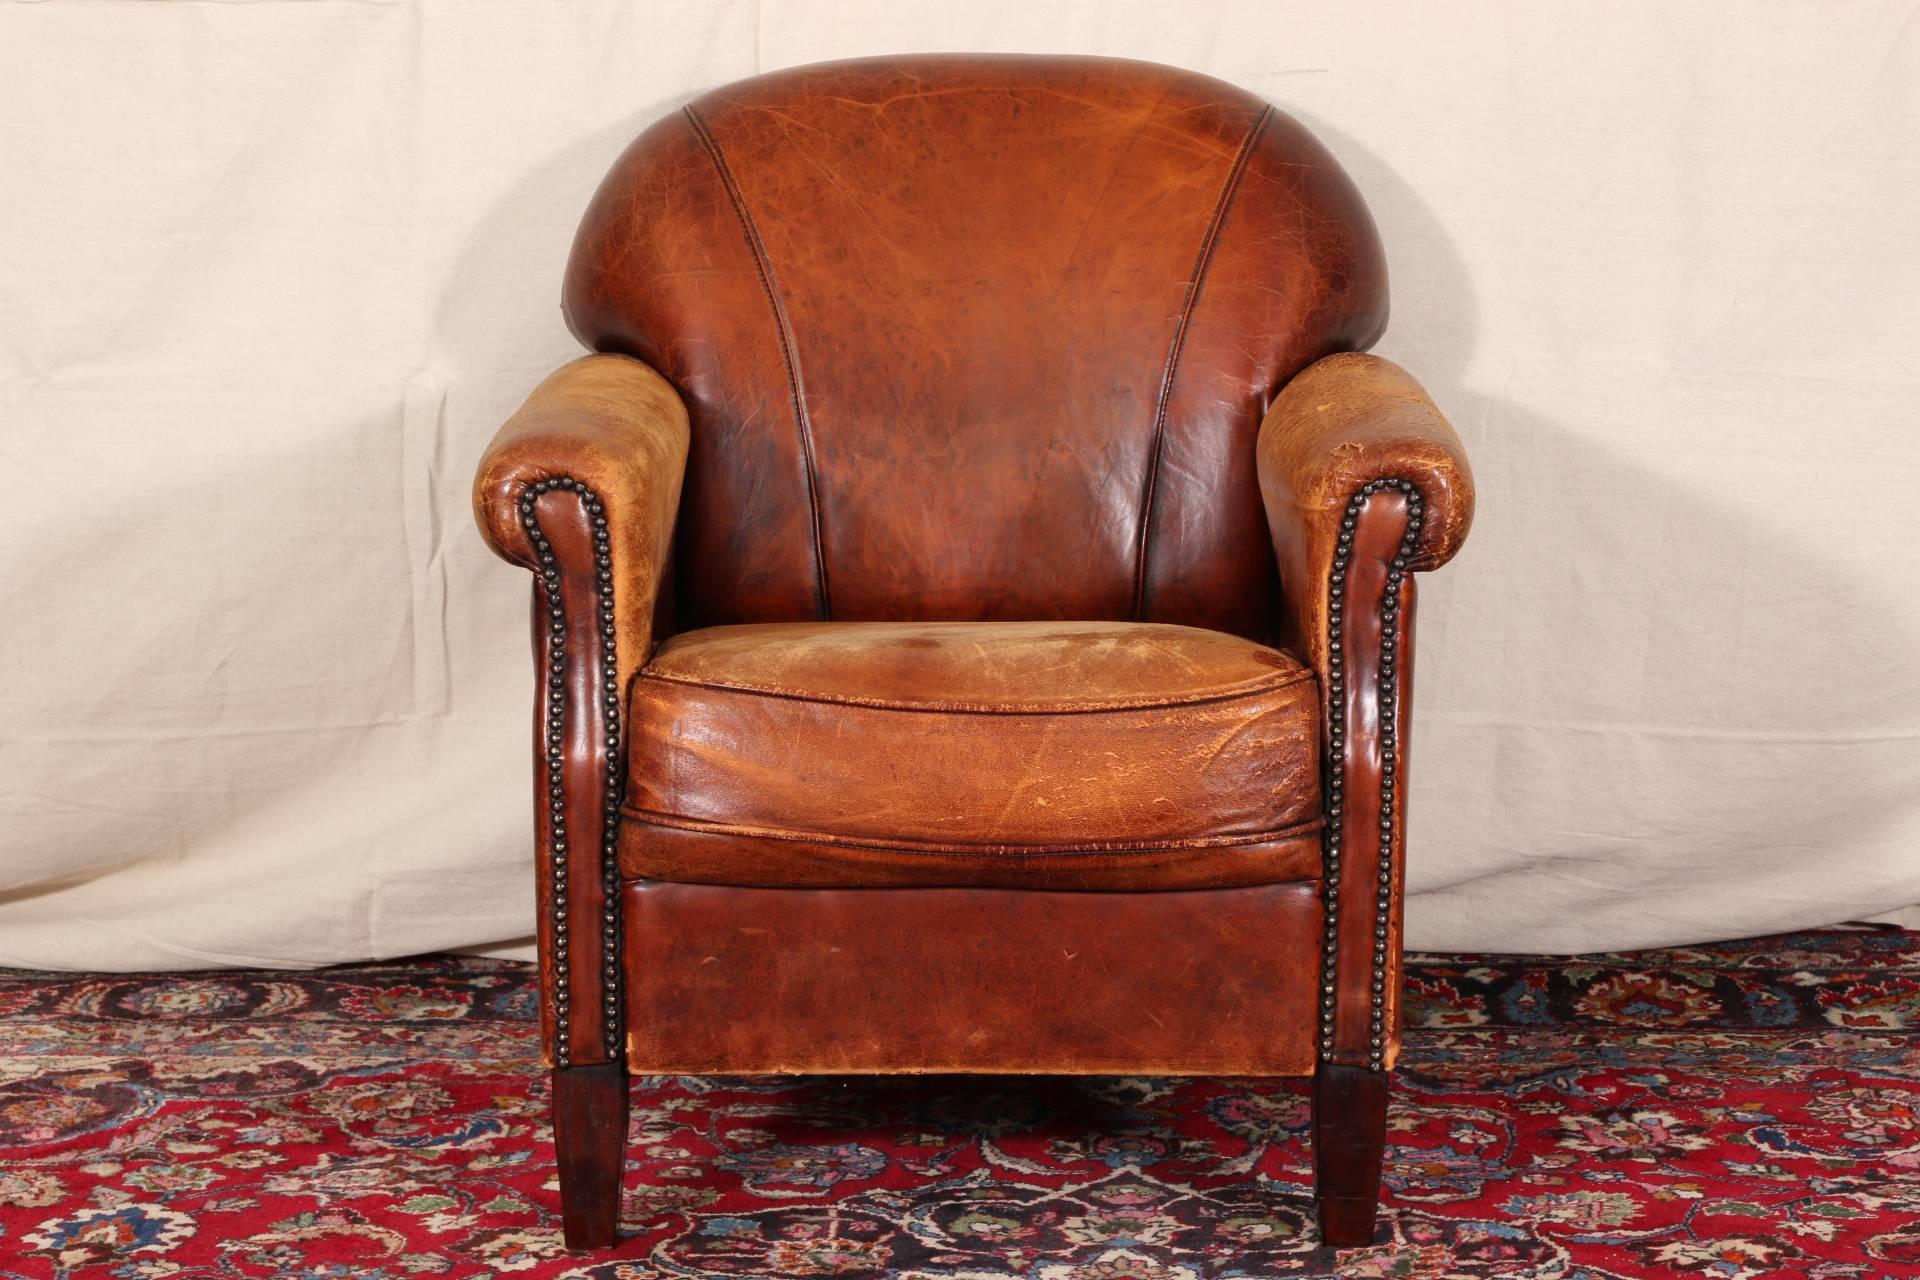 Distressed leather club chair, with a fan shaped back and tack details on the fronts of the arms. Raised on square mahogany legs. 

Condition: Expected wear and signs of use including worn seat and arms, small hole at end of one arm.